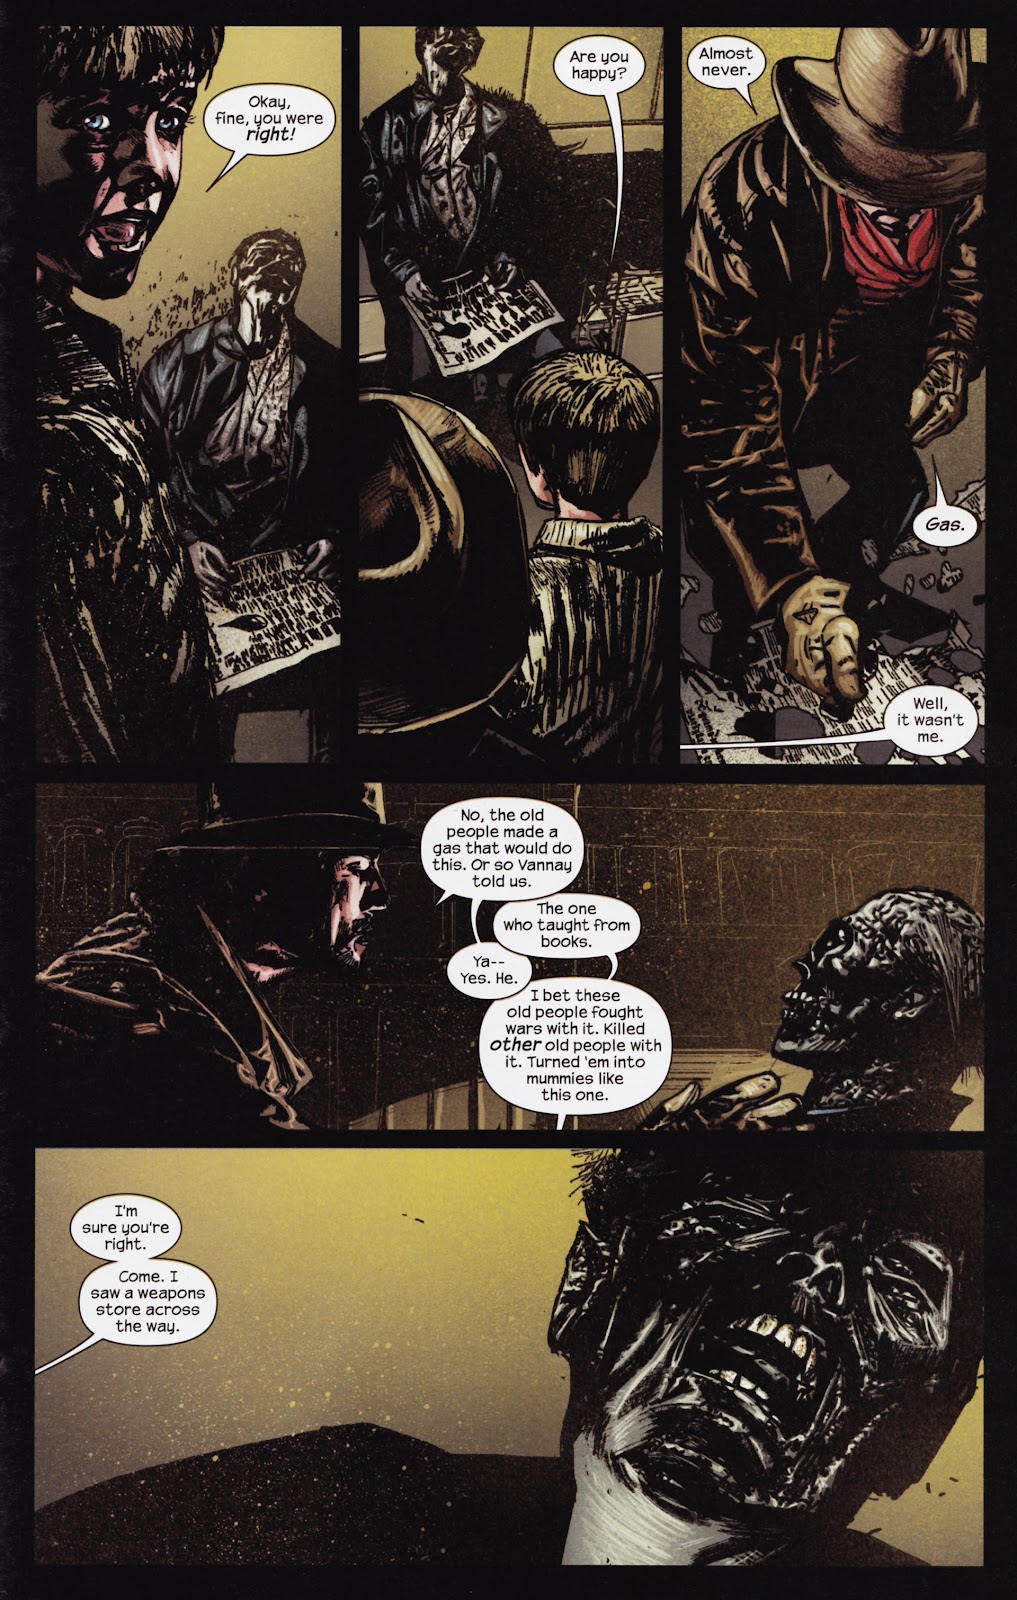 Dark Tower: The Gunslinger - The Man in Black issue 3 - Page 19